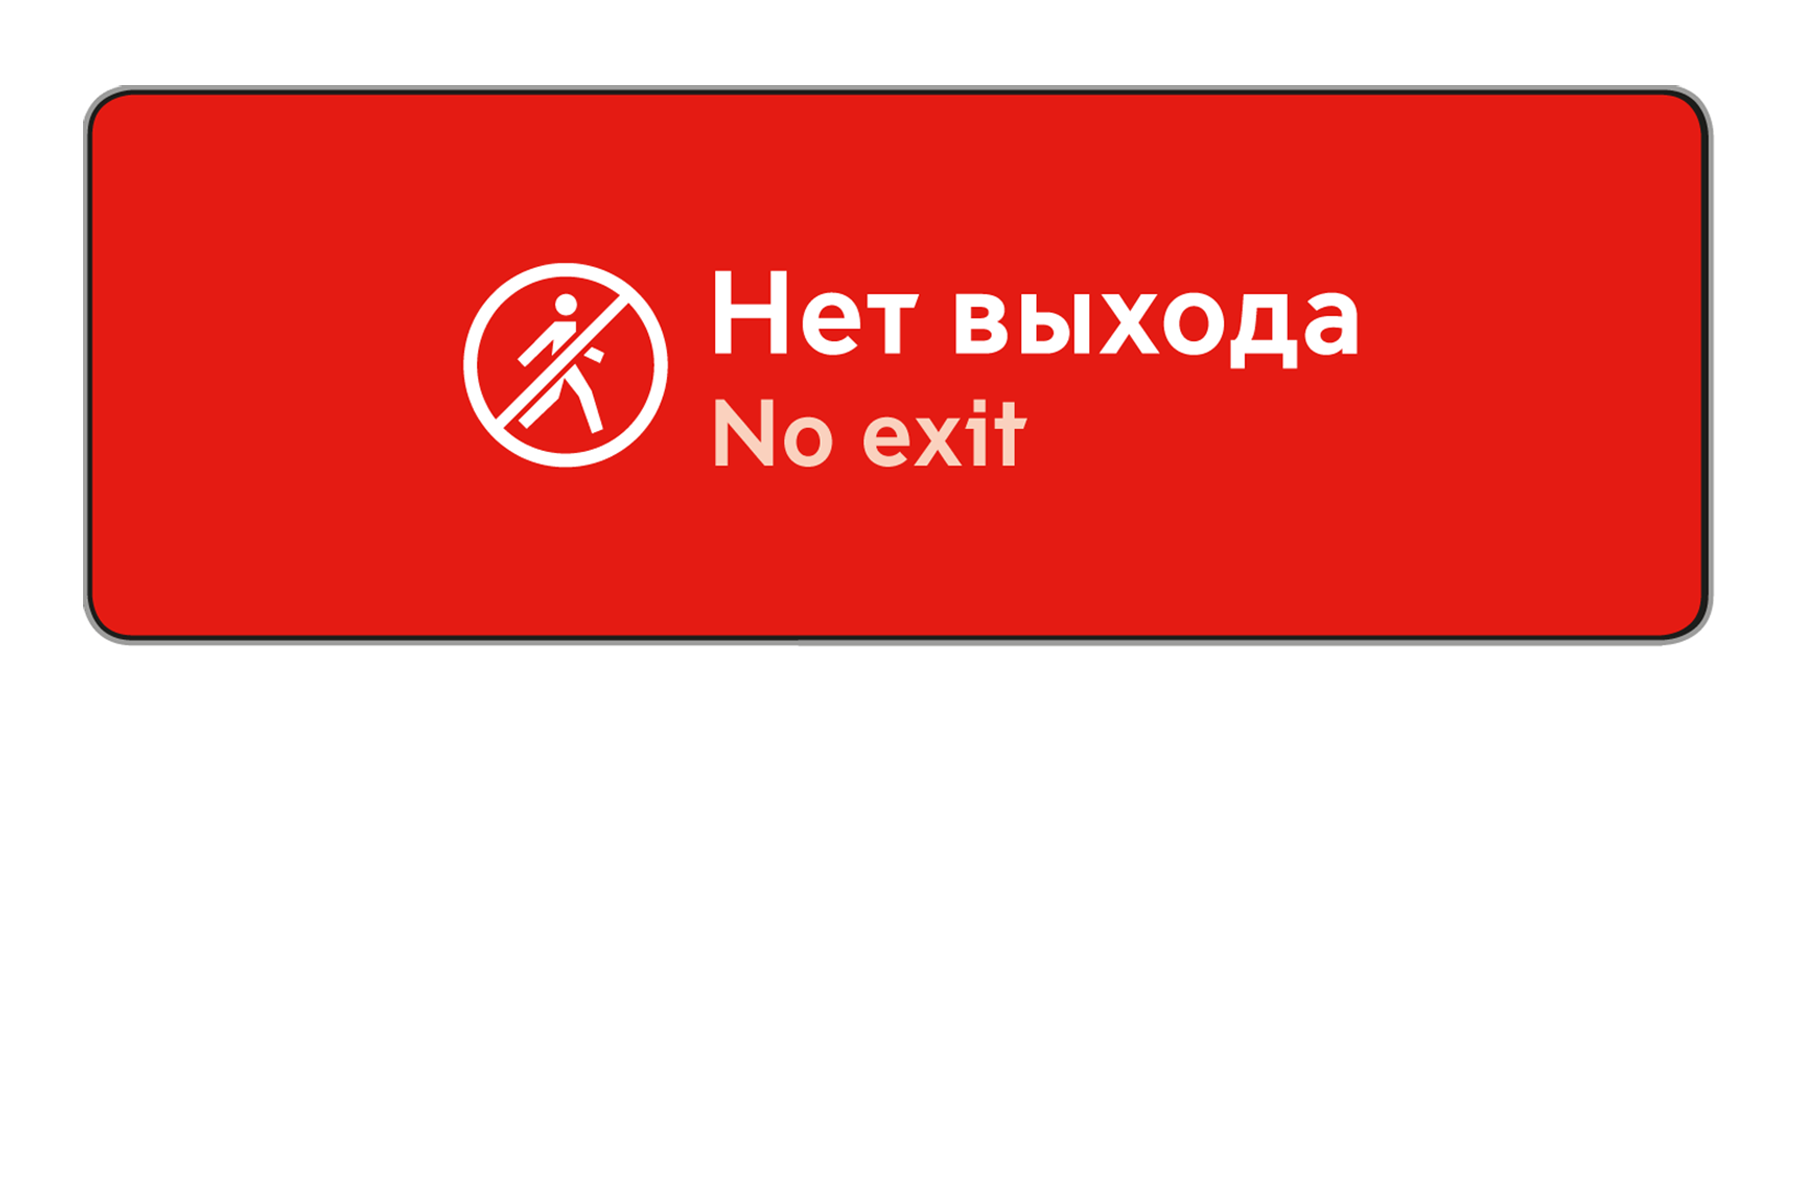 Wayfinding for Moscow